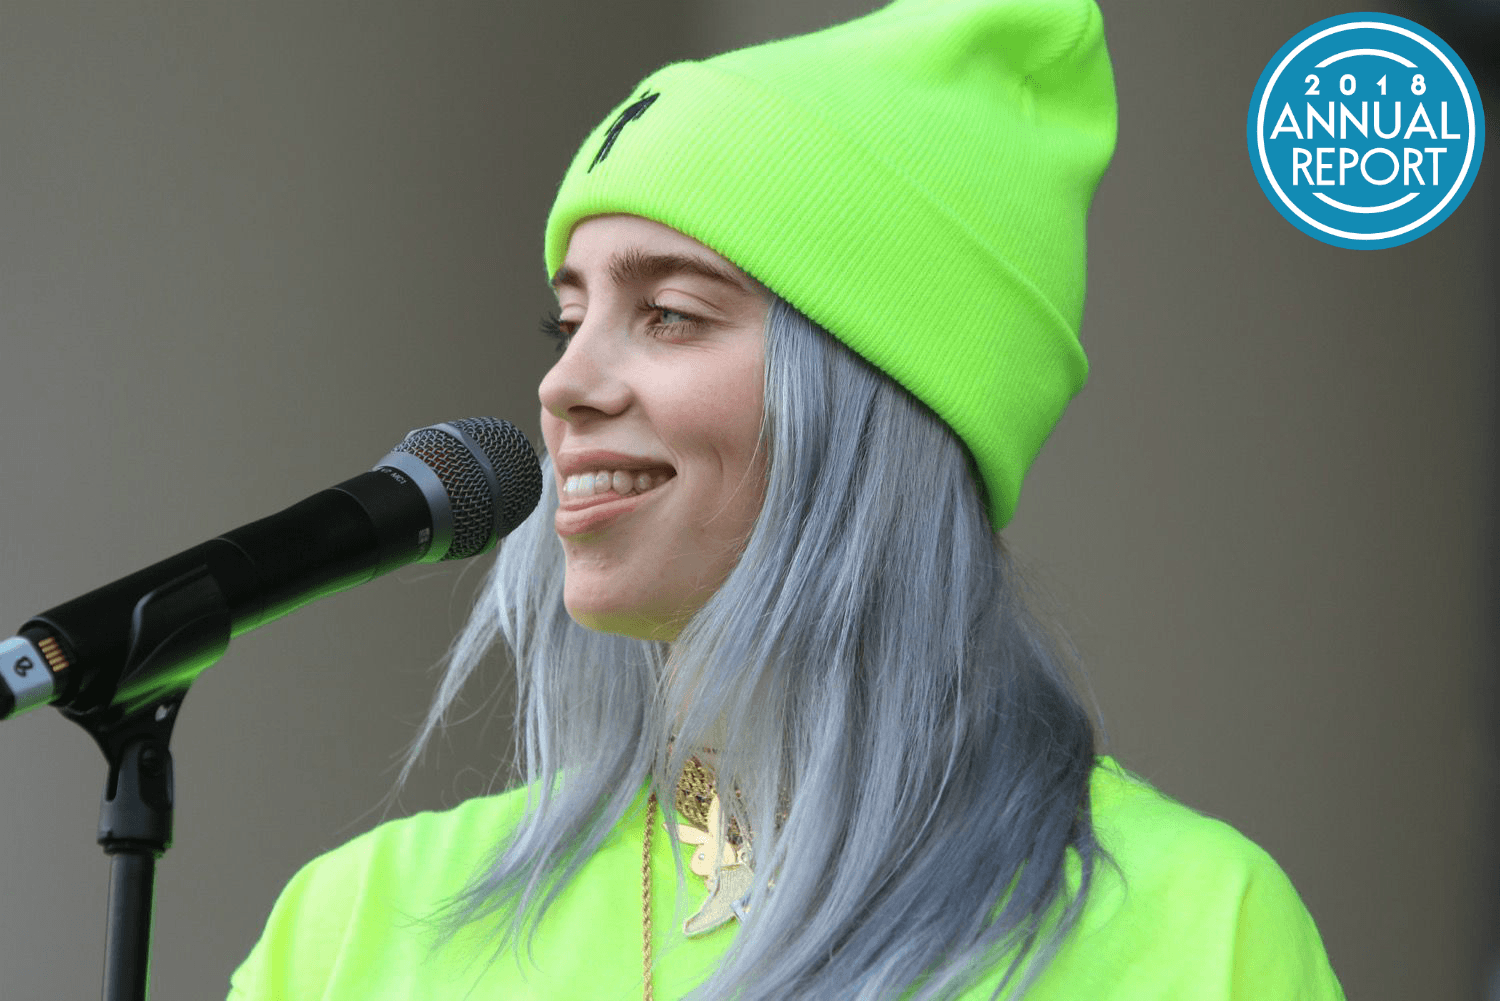 Rookie of the Year: Billie Eilish Grew Up and Blew Up